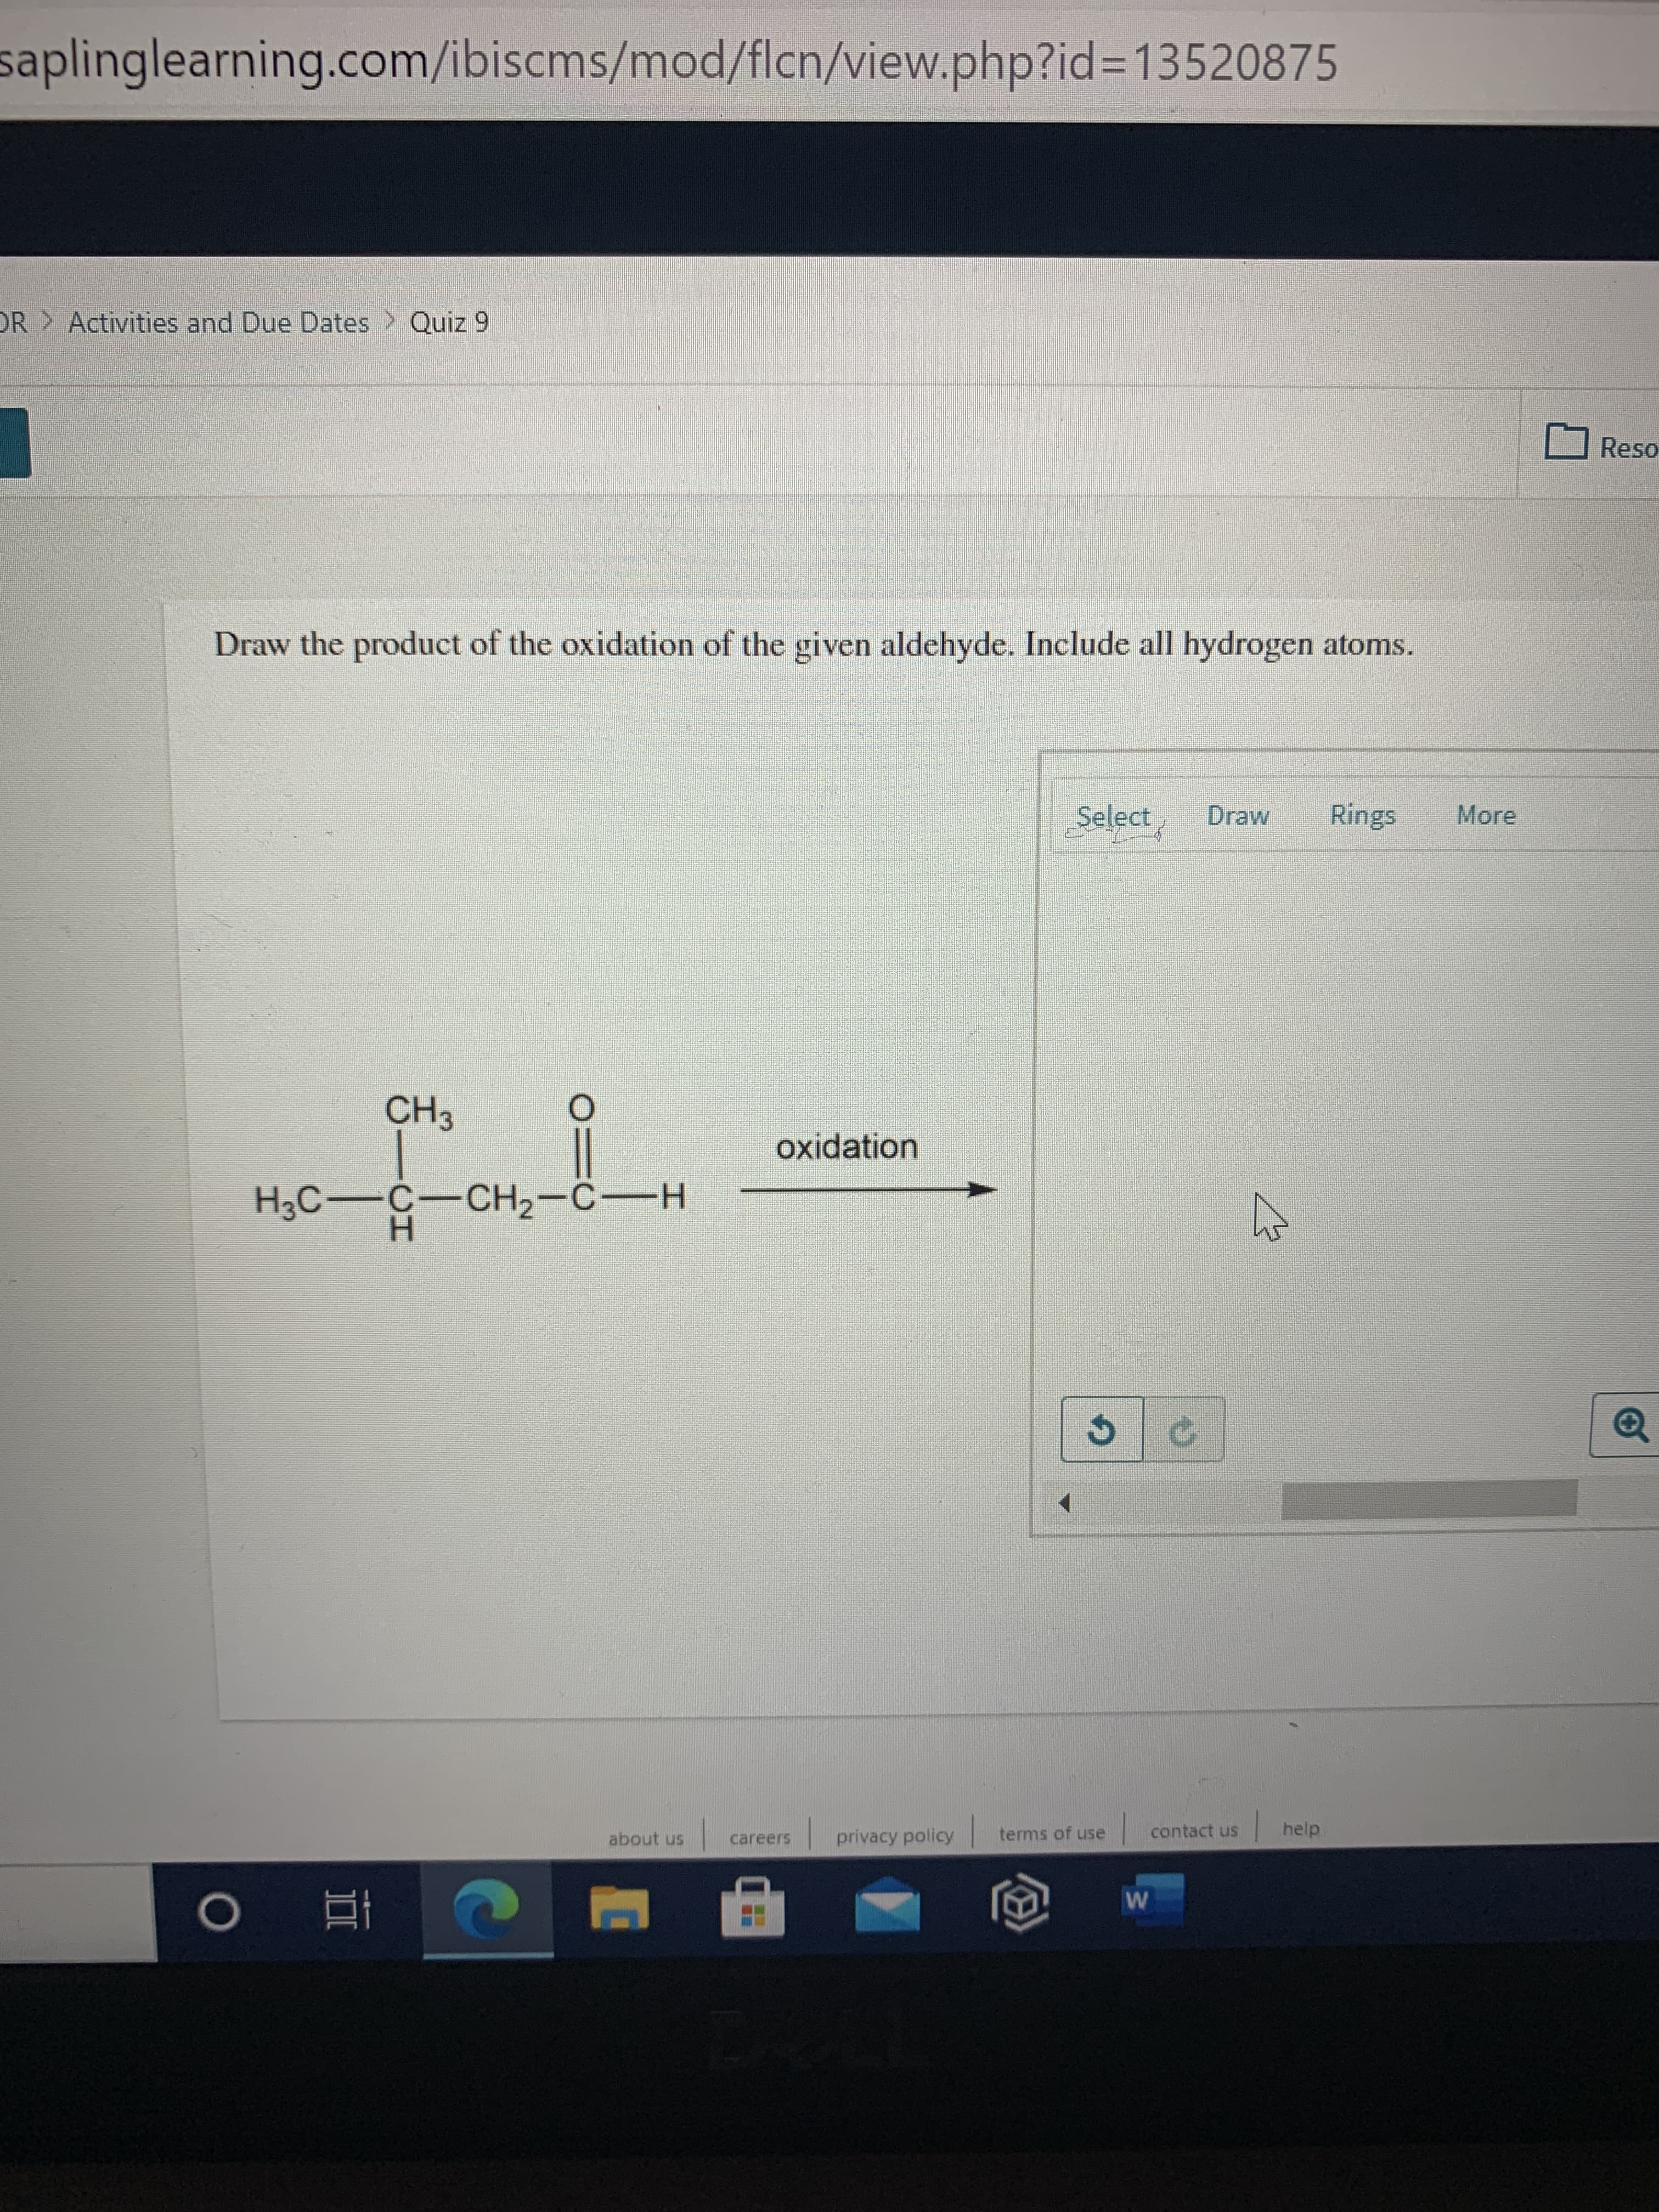 Draw the product of the oxidation of the given aldehyde. Include all hydrogen atoms.
